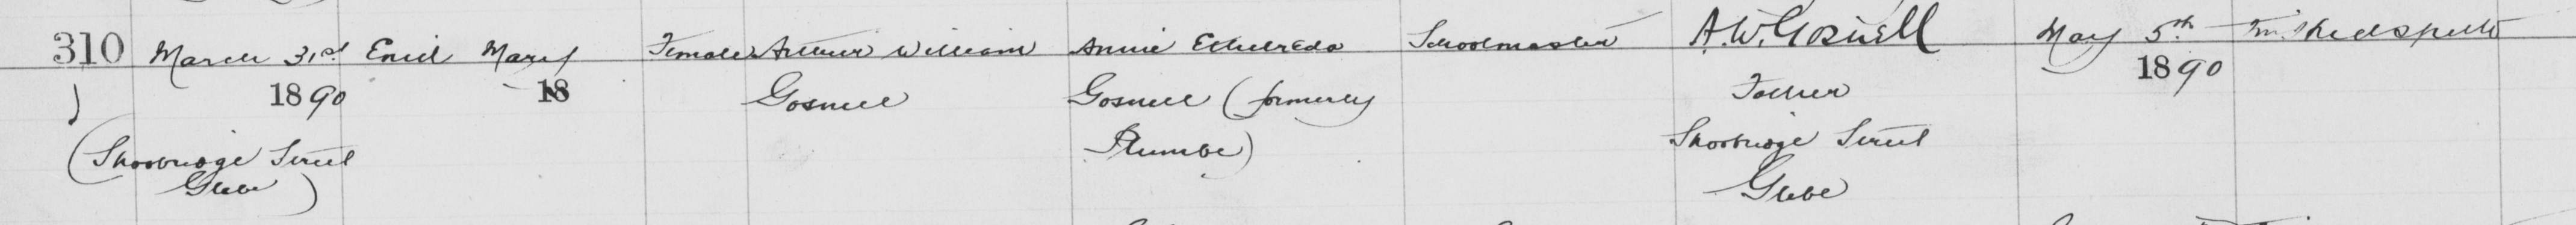 Birth Register entry for Enid Mary Gosnell